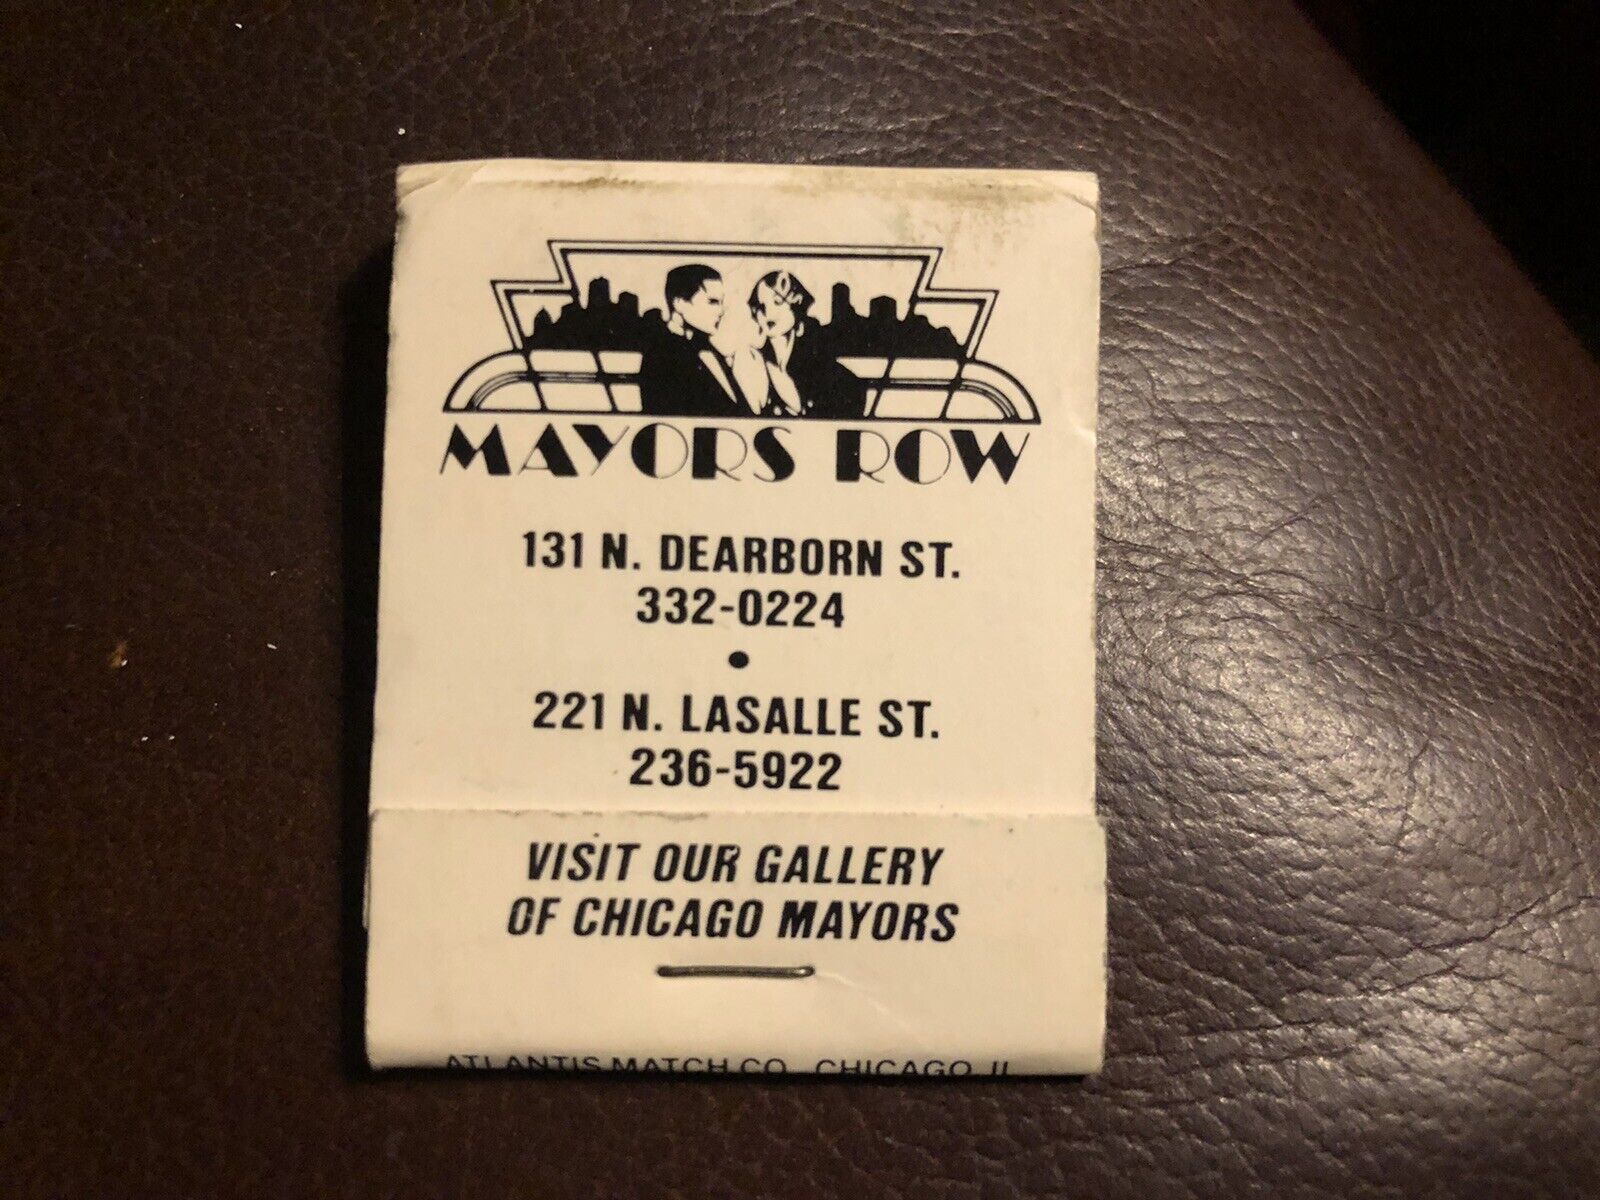 Mayor’s Row, Chicago, IL, Full Unstruck Matchbook